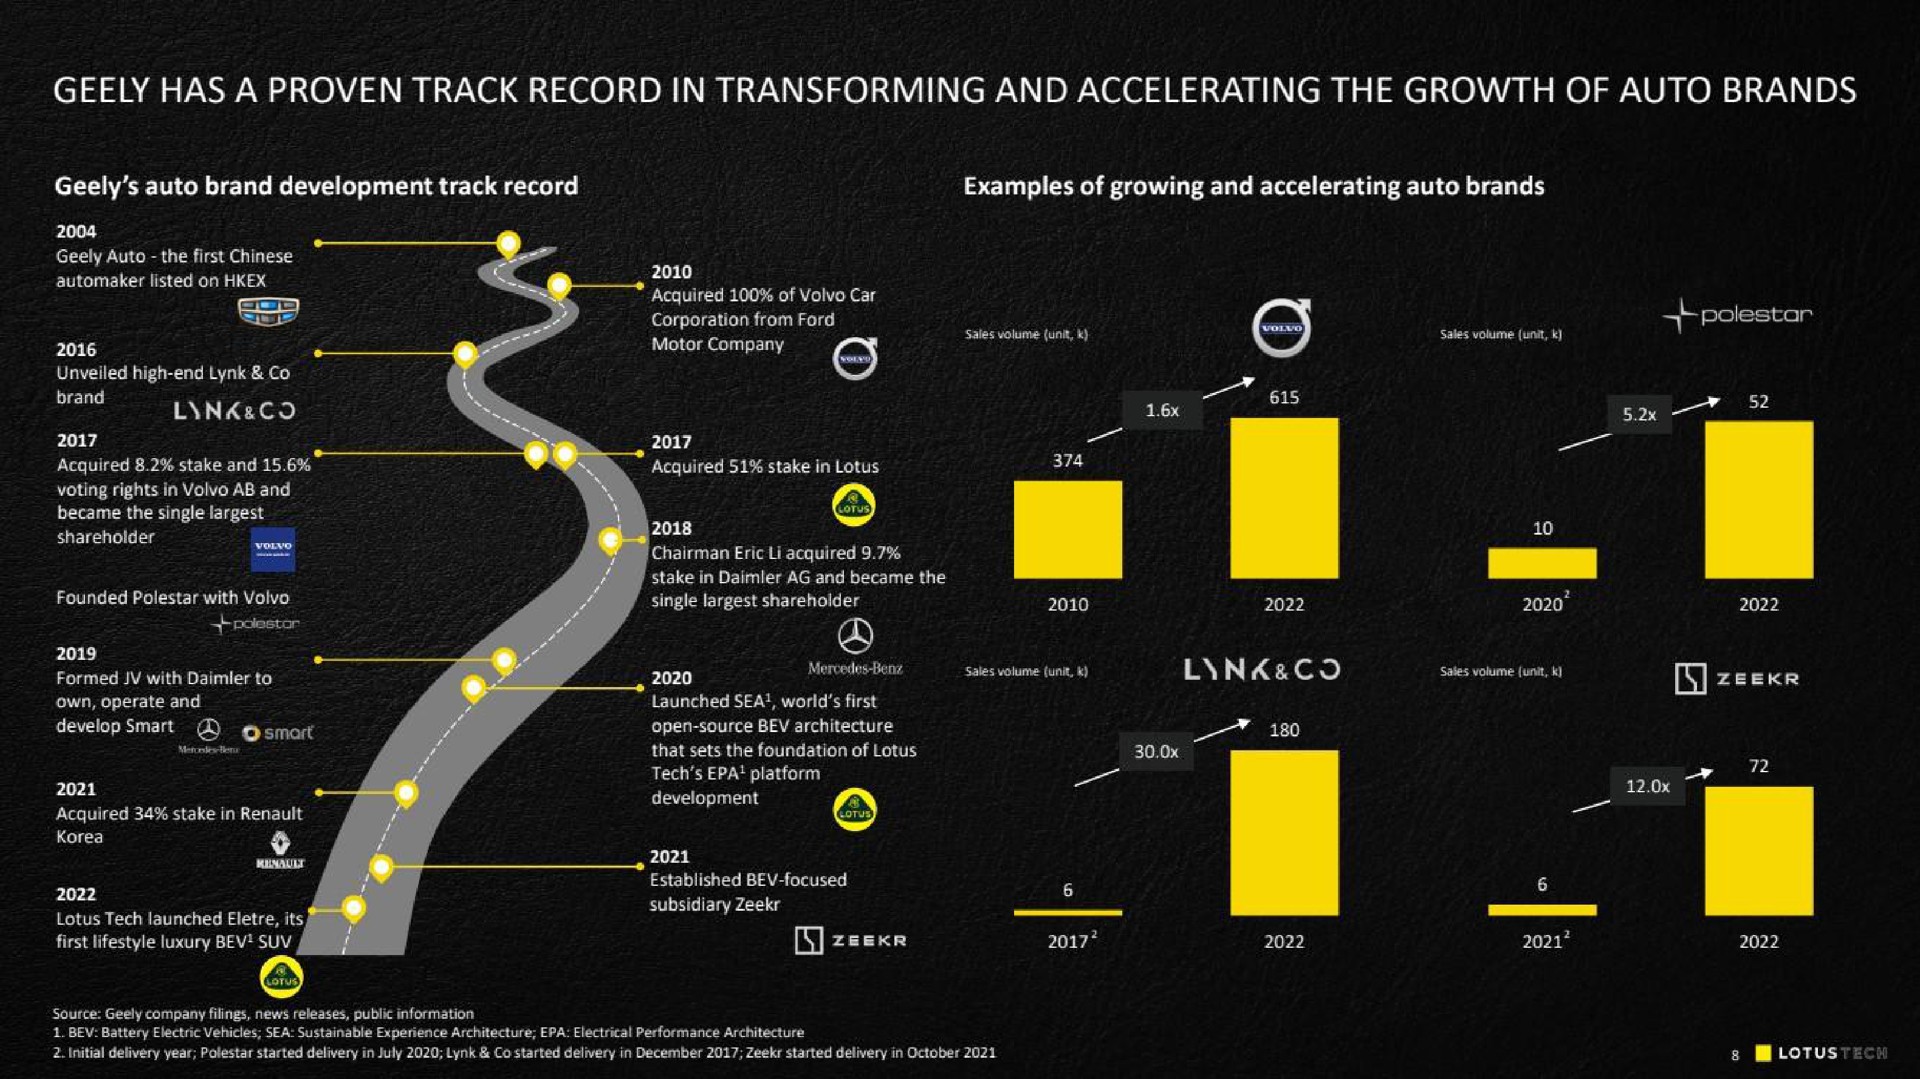 has a proven track record in transforming and accelerating the growth of auto brands | Lotus Cars